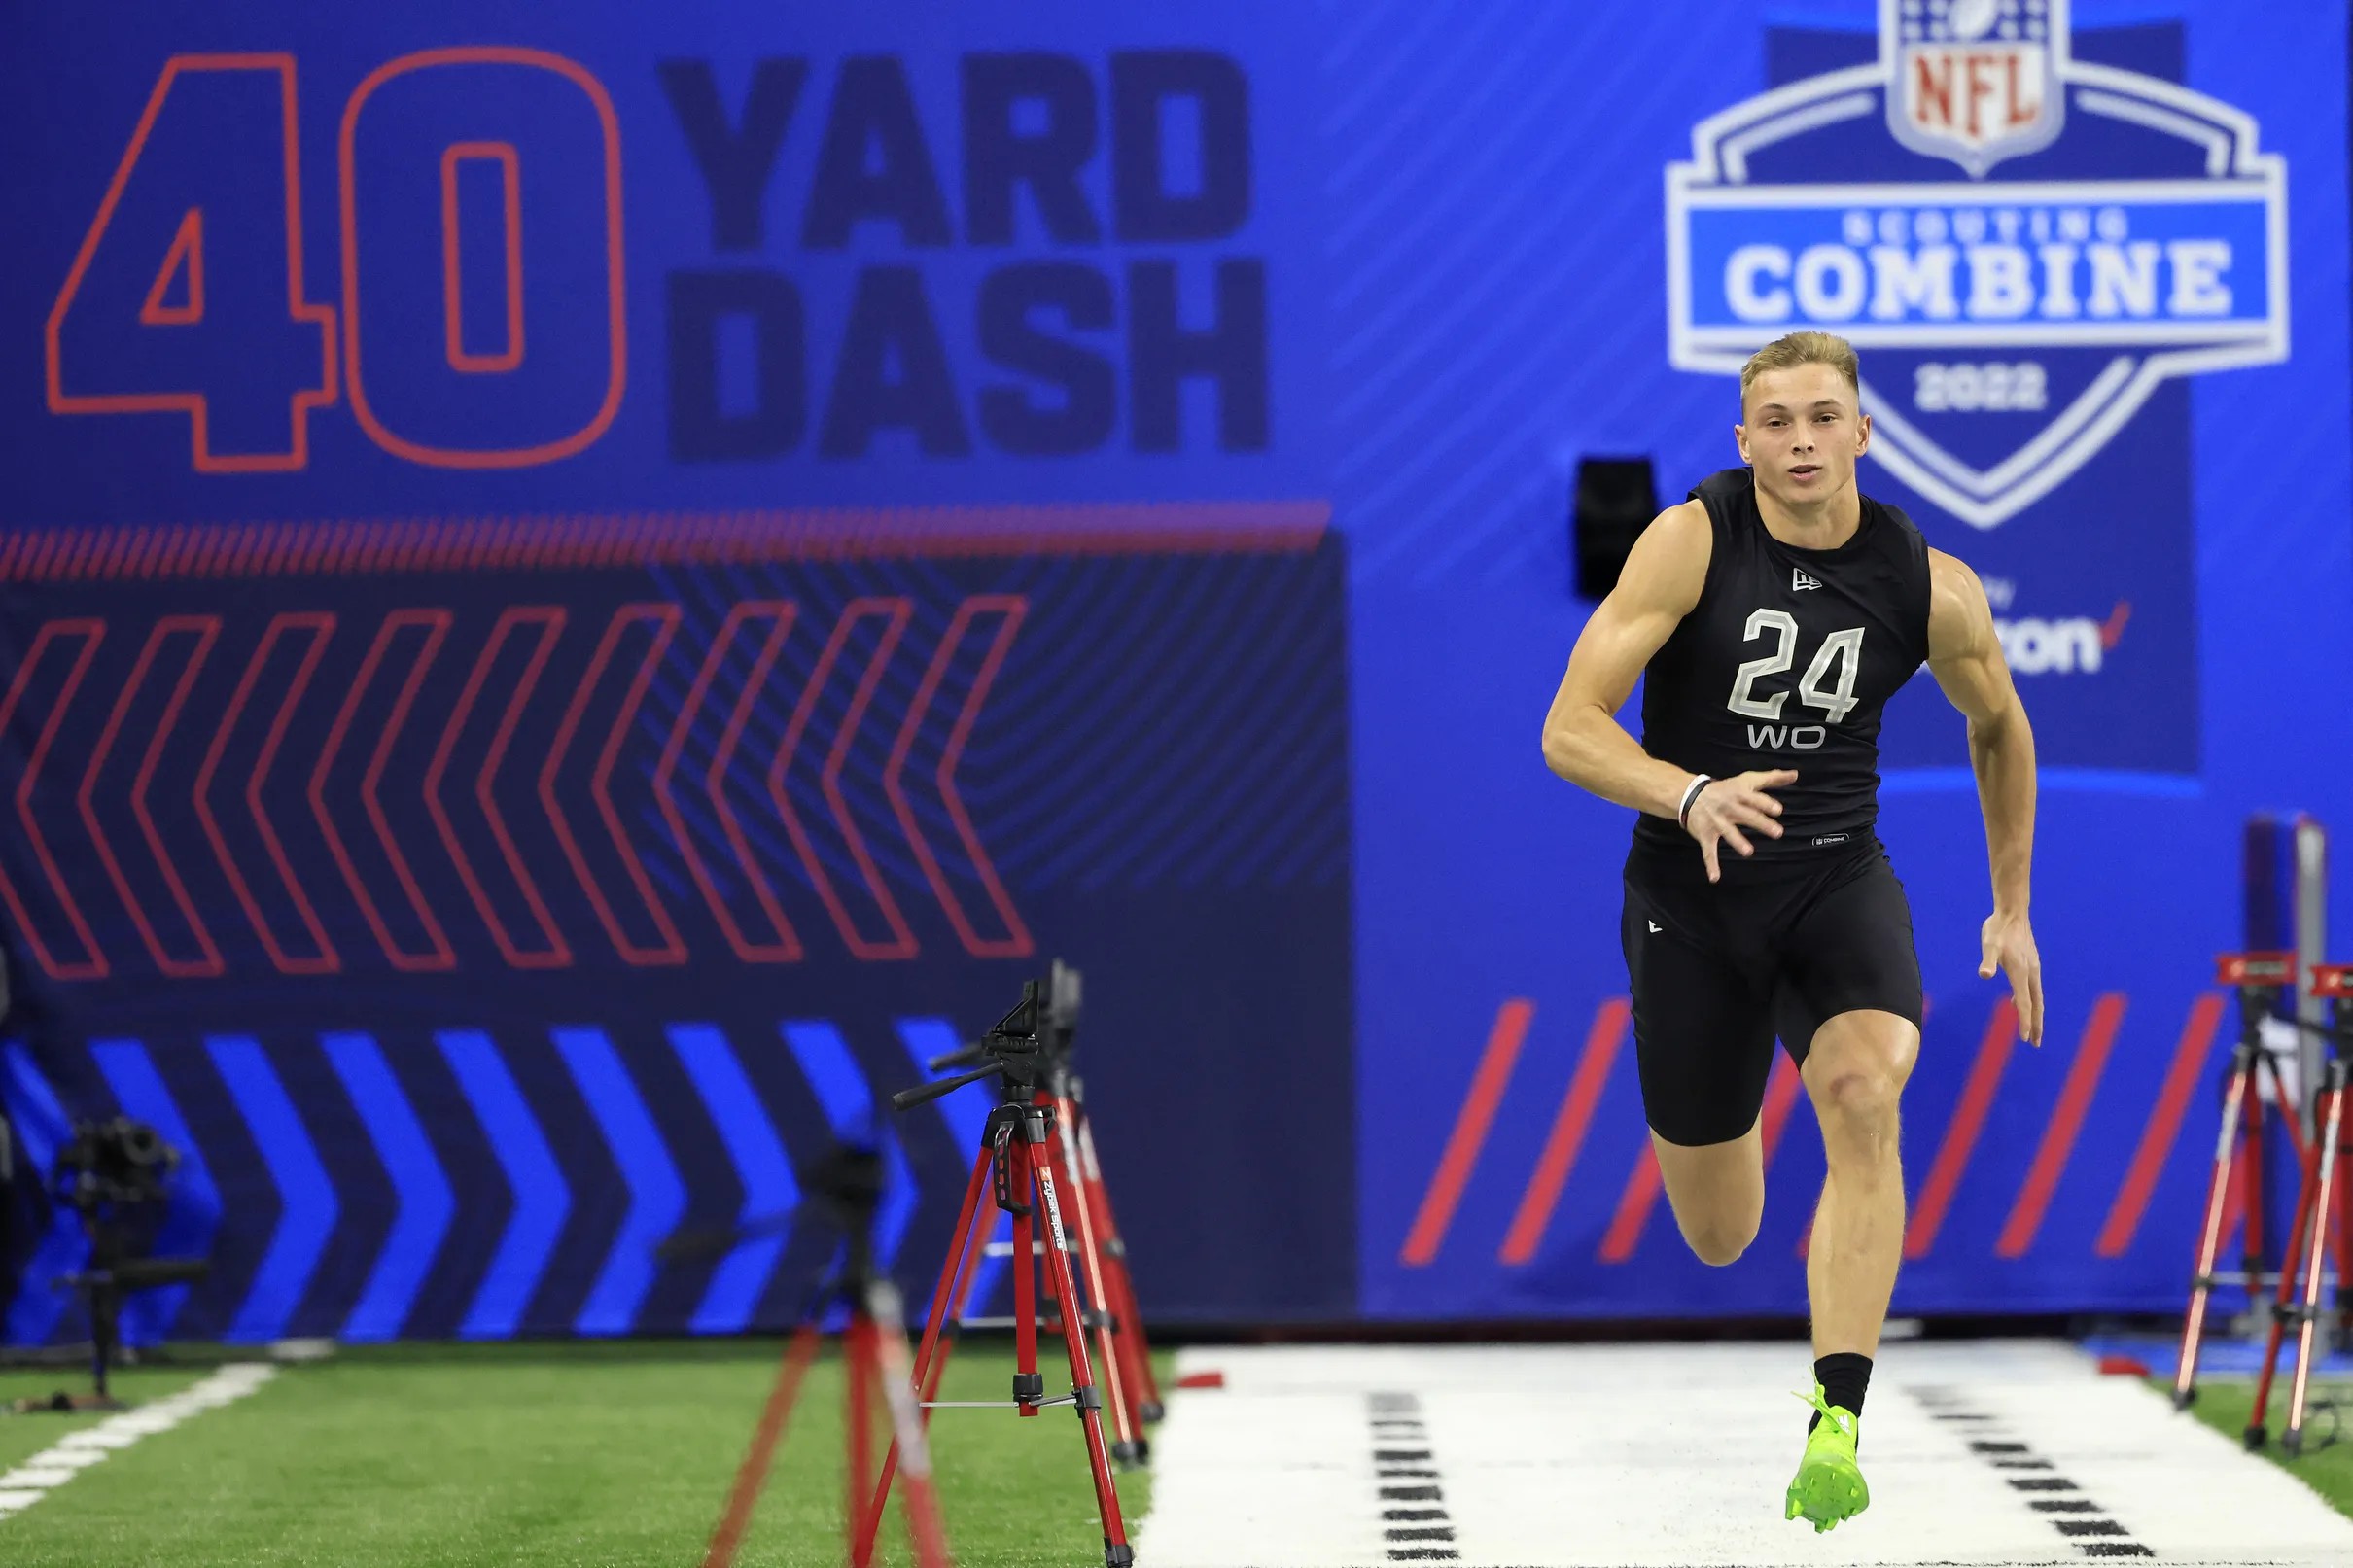 Indianapolis to Remain Host City of NFL Combine Through At Least 2024